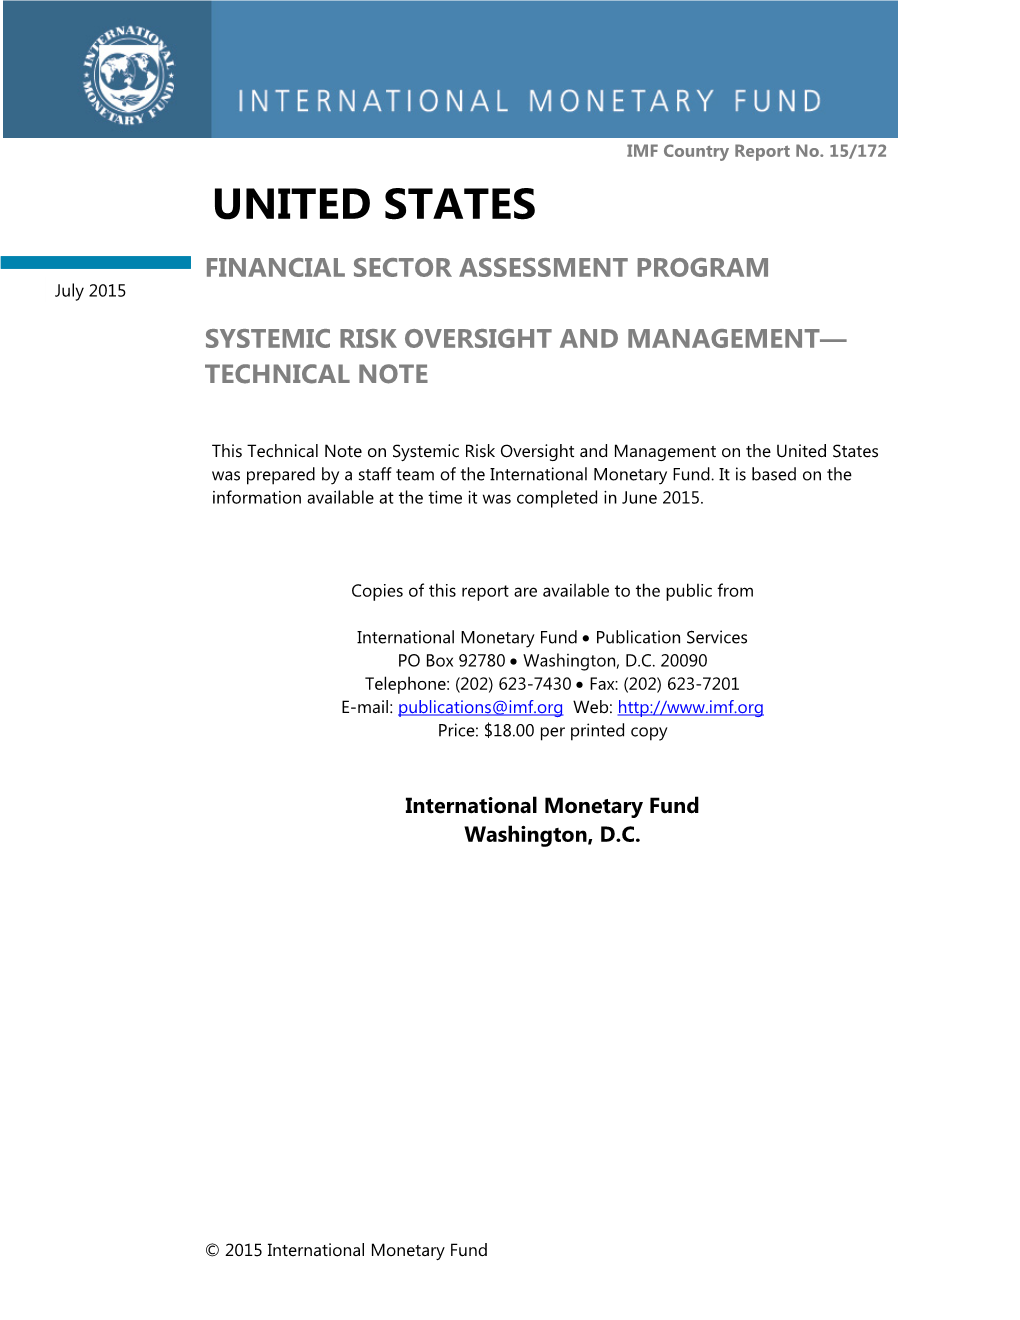 Technical Note on Systemic Risk Oversight and Management on the United States Was Prepared by a Staff Team of the International Monetary Fund